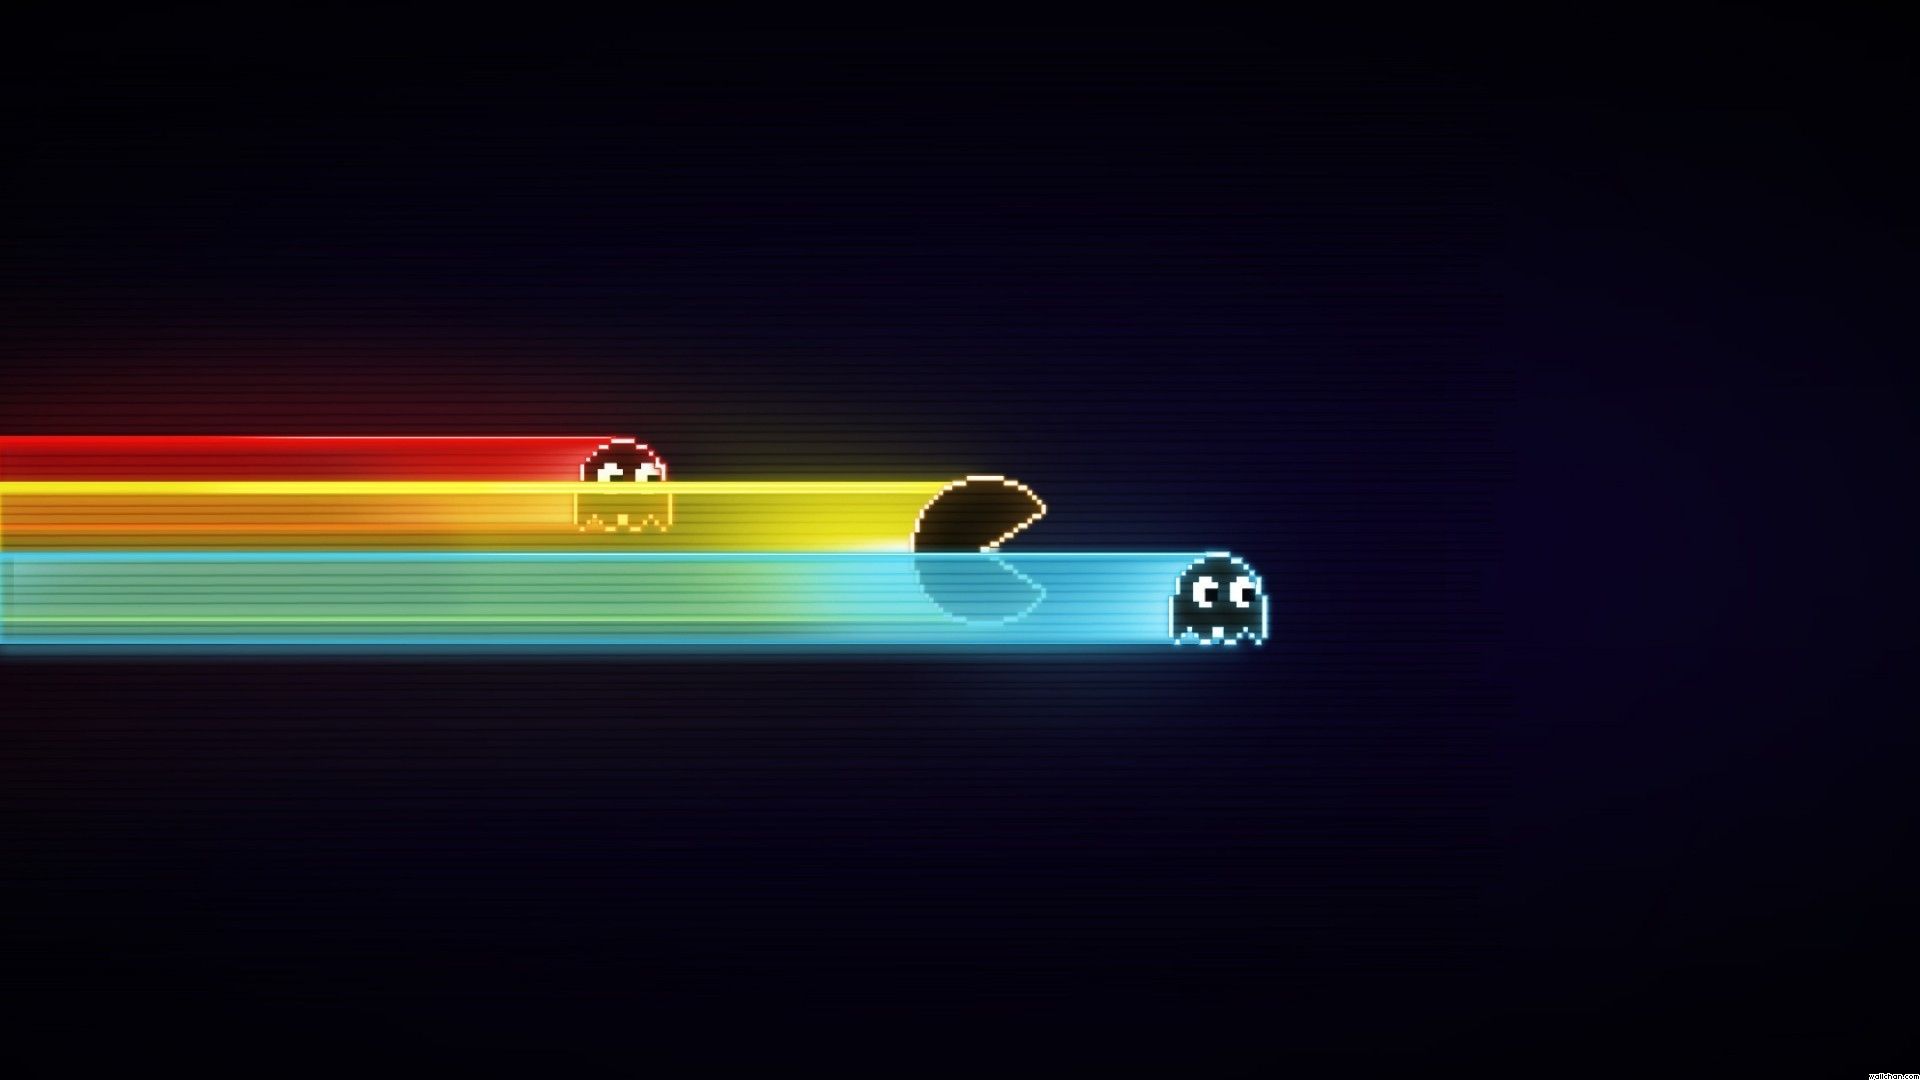 Pac Man Wallpapers Pictures Images HD Wallpapers Download Free Images Wallpaper [wallpaper981.blogspot.com]